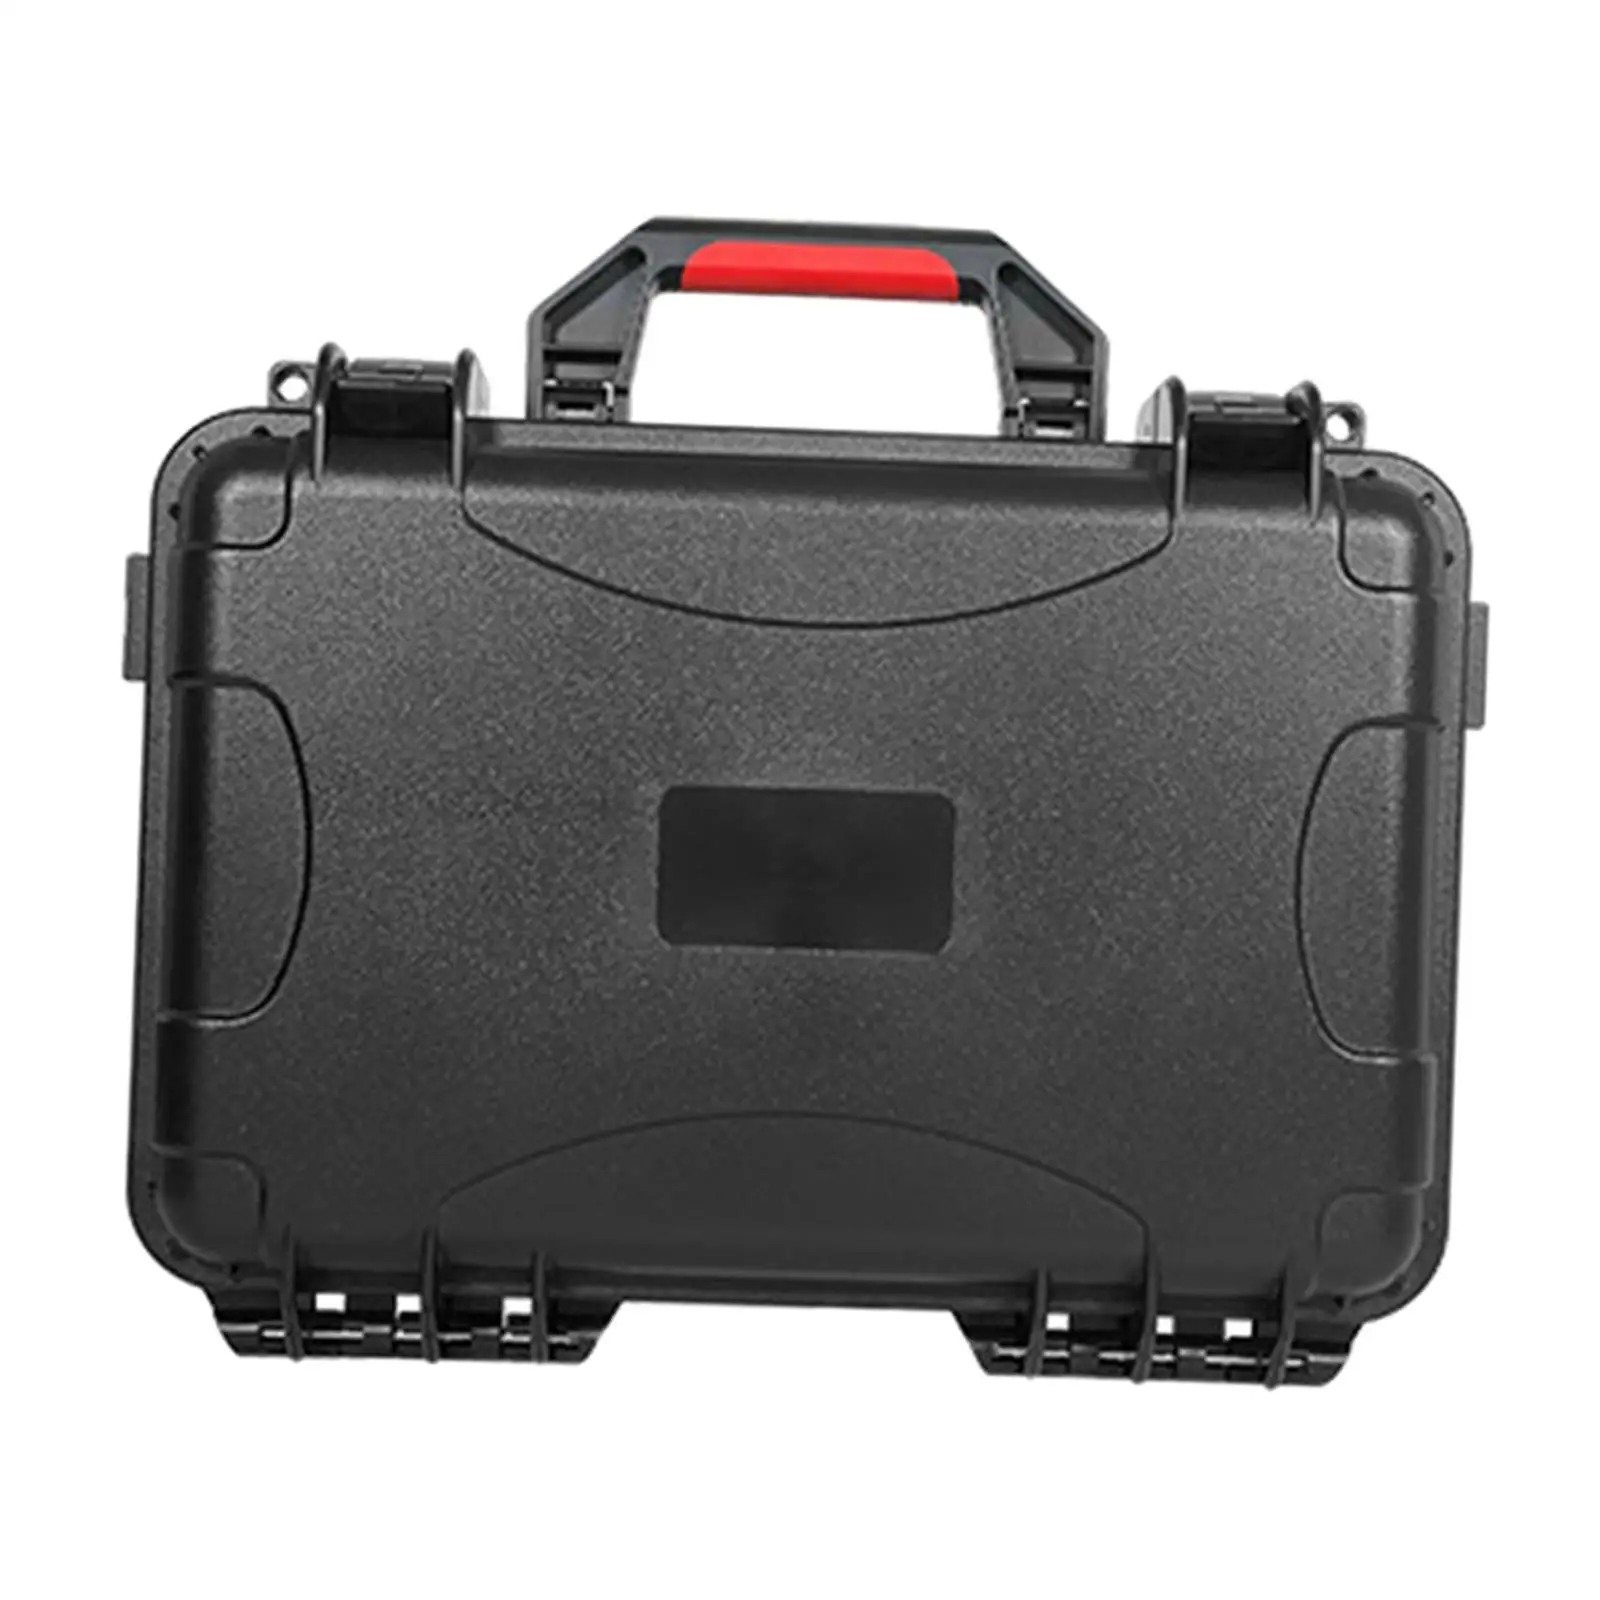 Travel Hard Shell Case Organizer Tool Storage Organizer Drone Body Carrying Case for Hiking Safety Outdoor Outdoor Photography